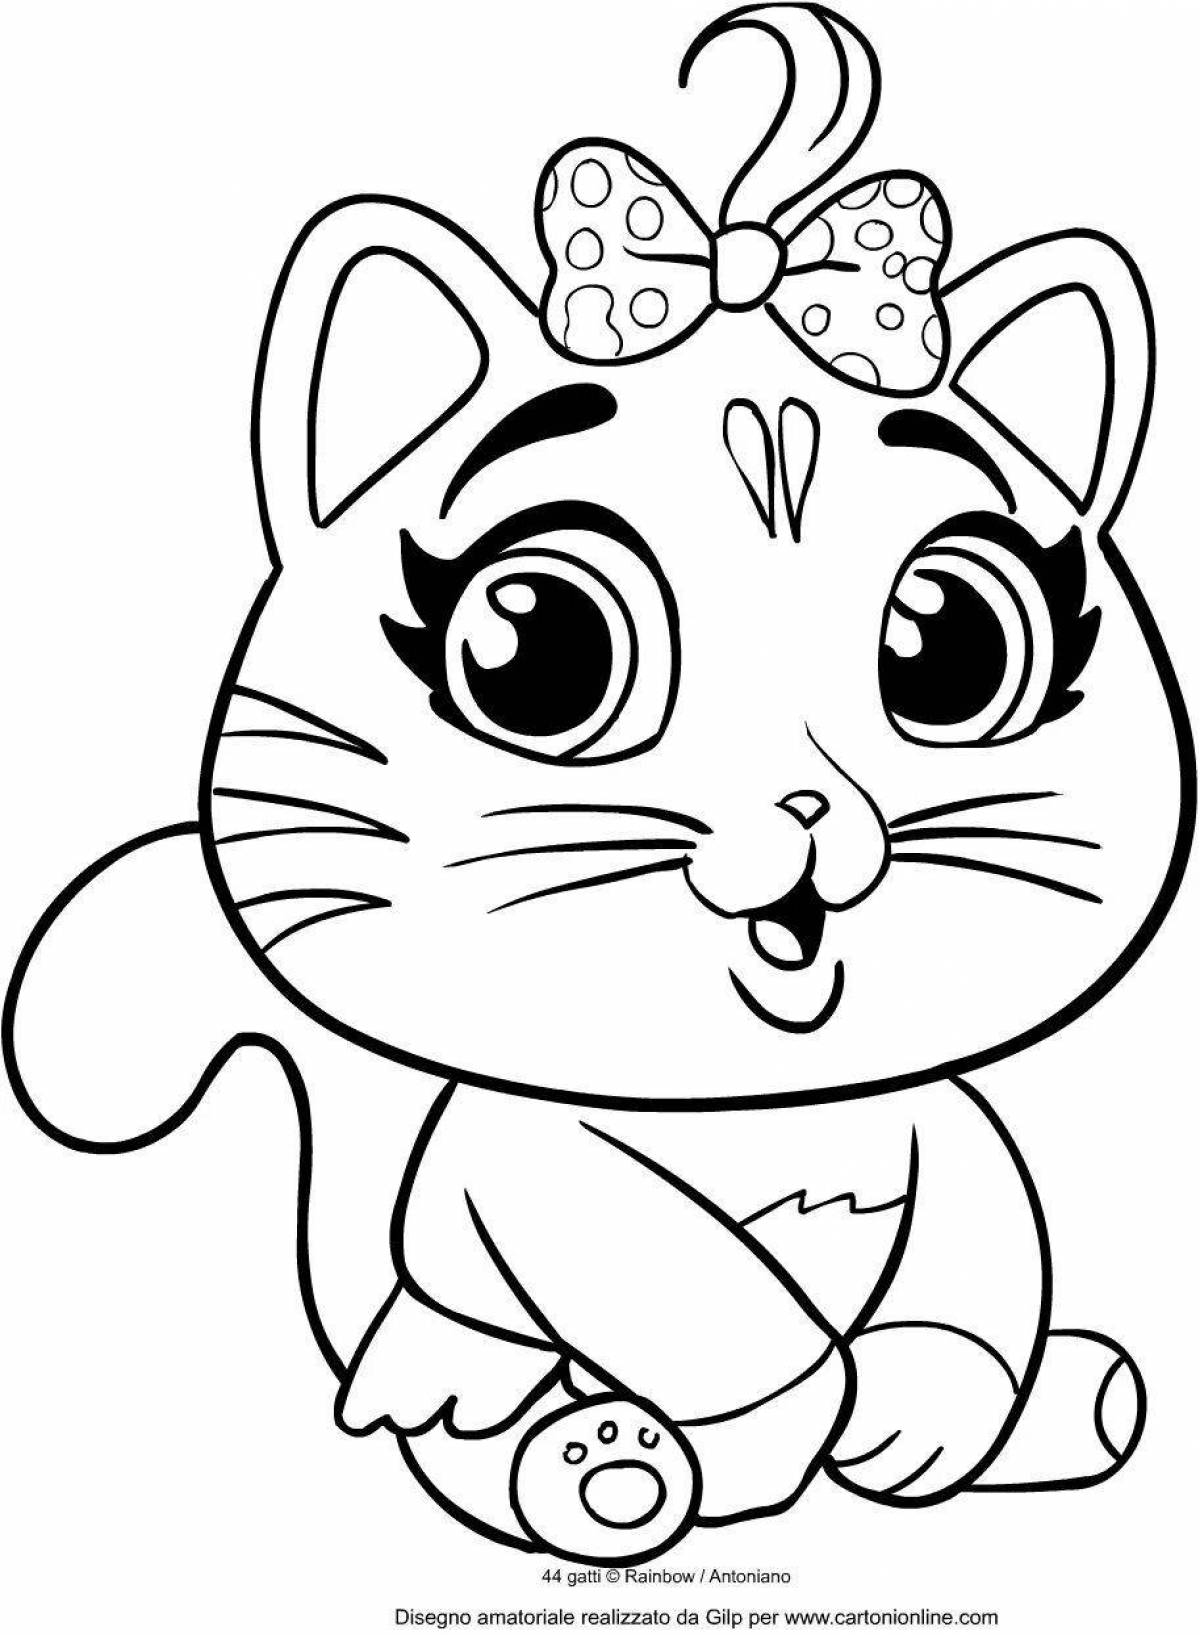 Delightful milady coloring book